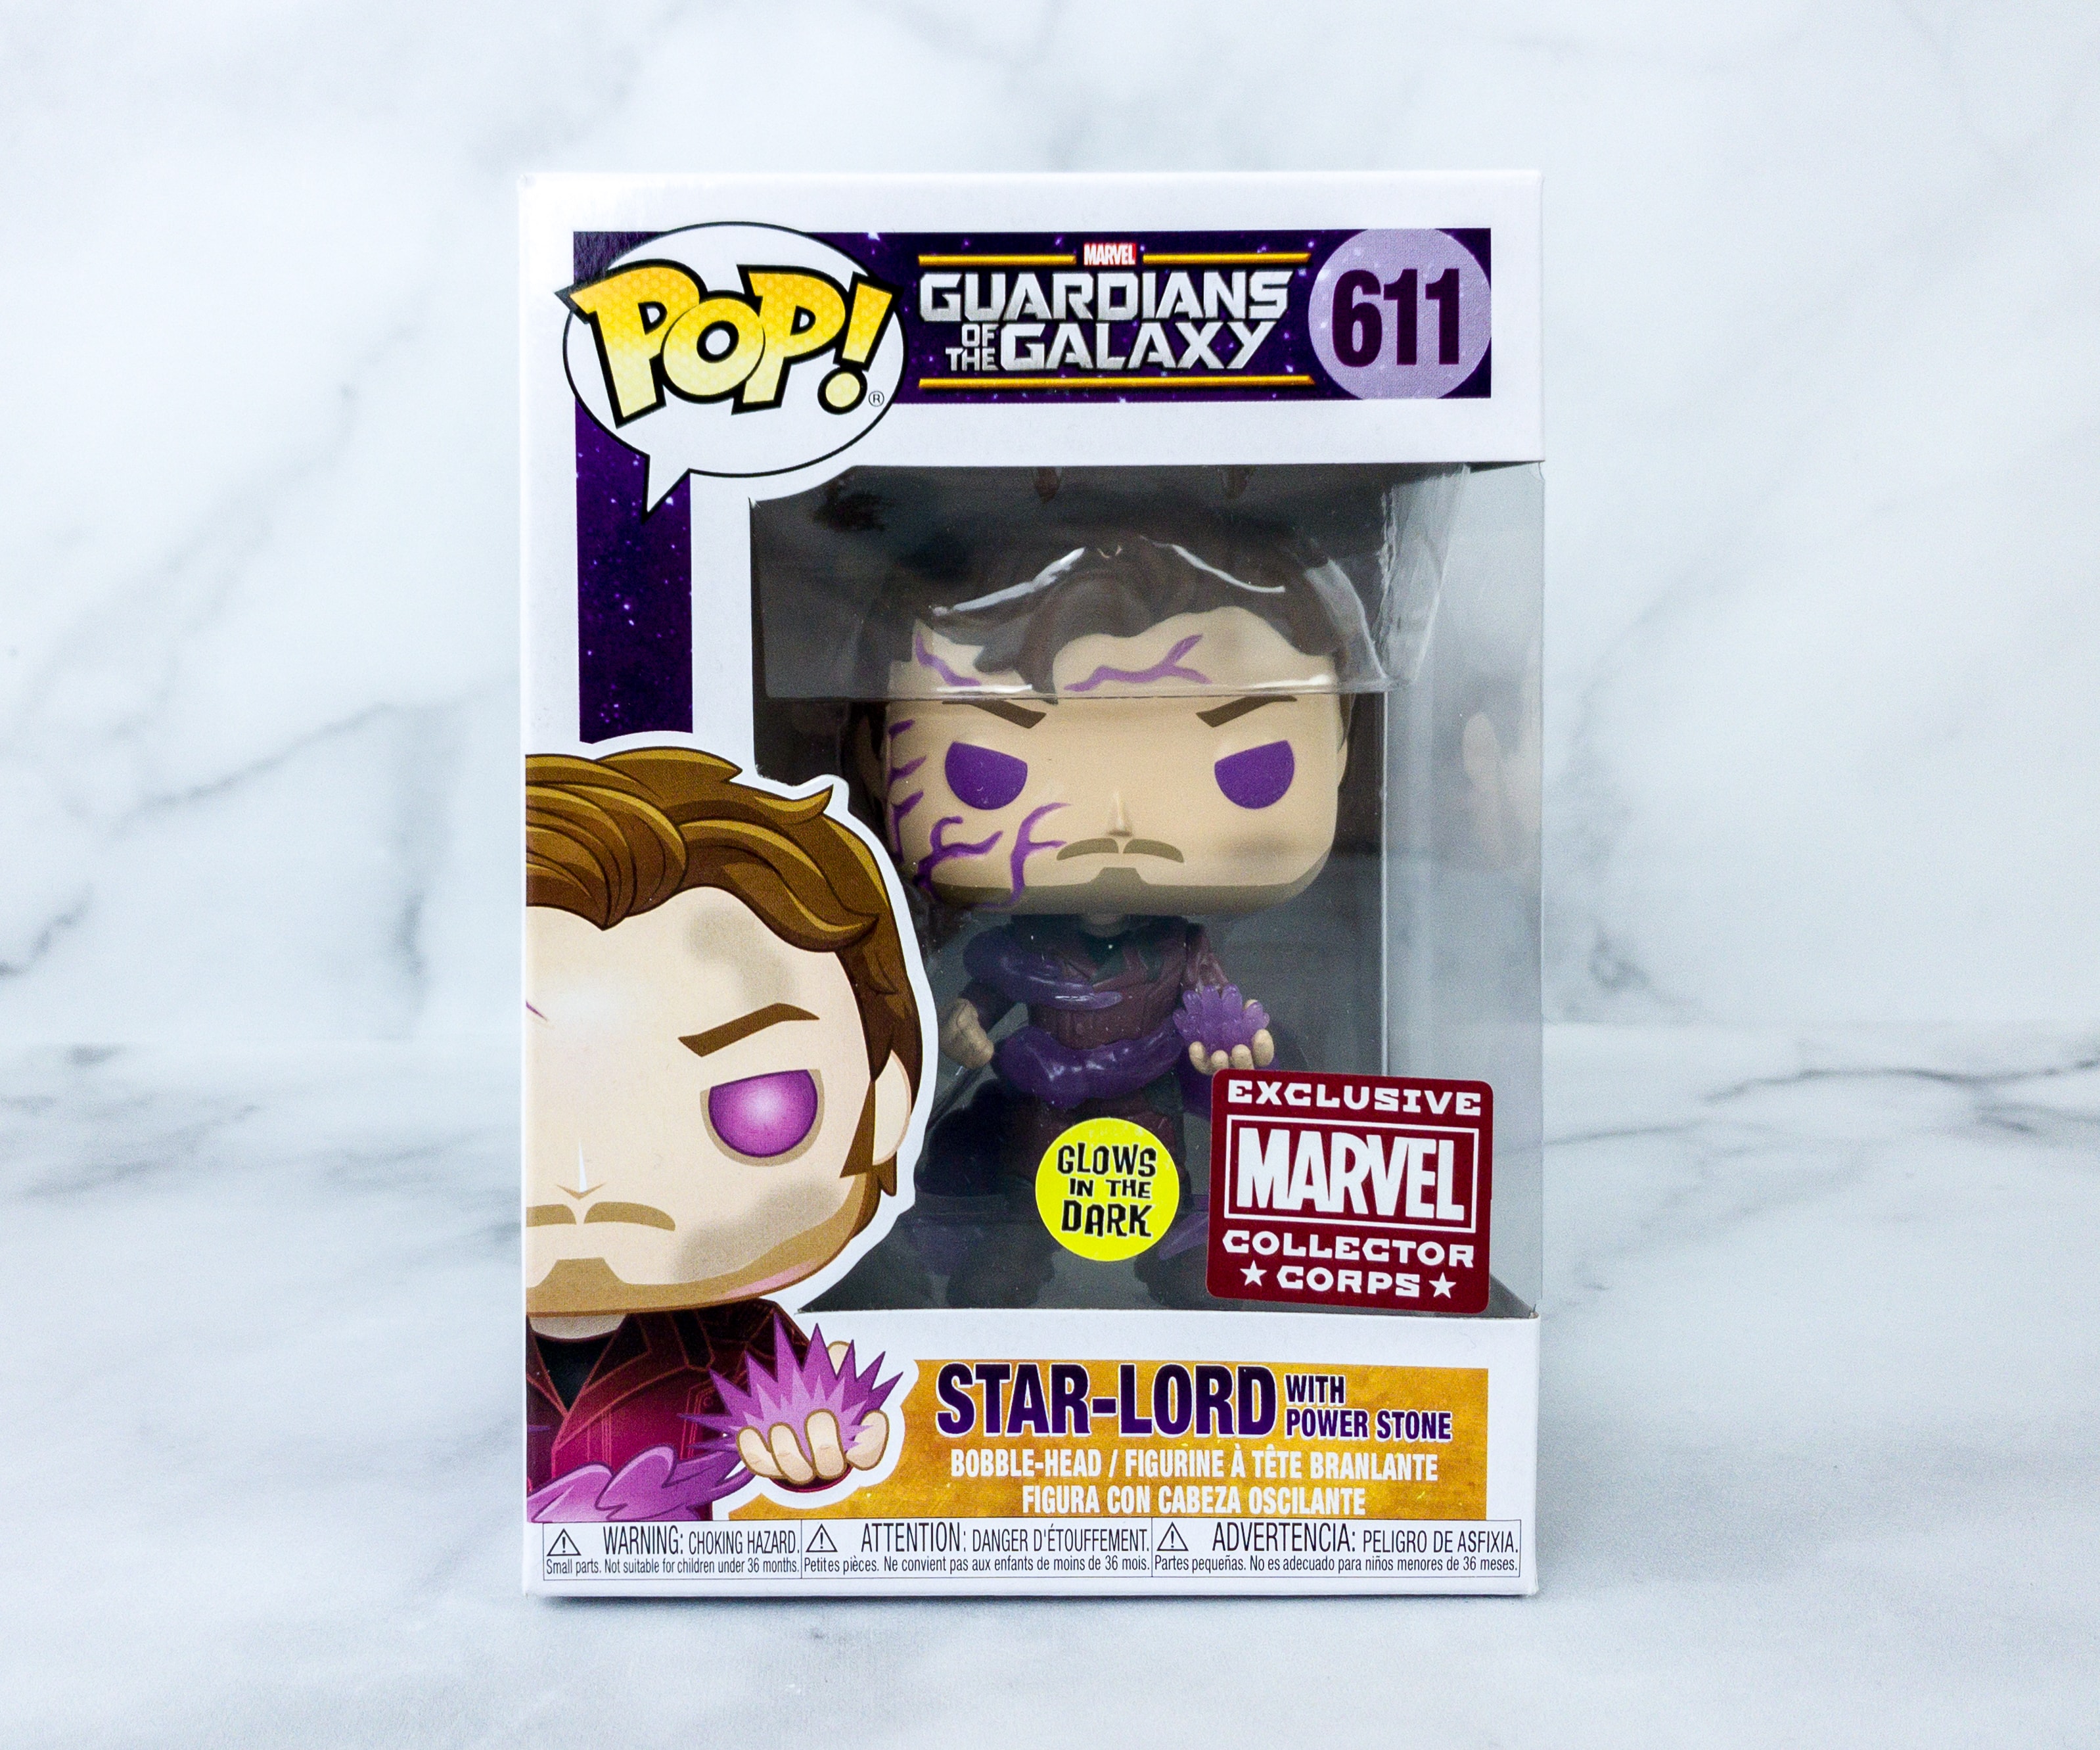 Funko Pop! Marvel Guardians of the Galaxy Star-Lord with Power Stone (Glow)  Marvel Collectors Corp Figure #611 - US